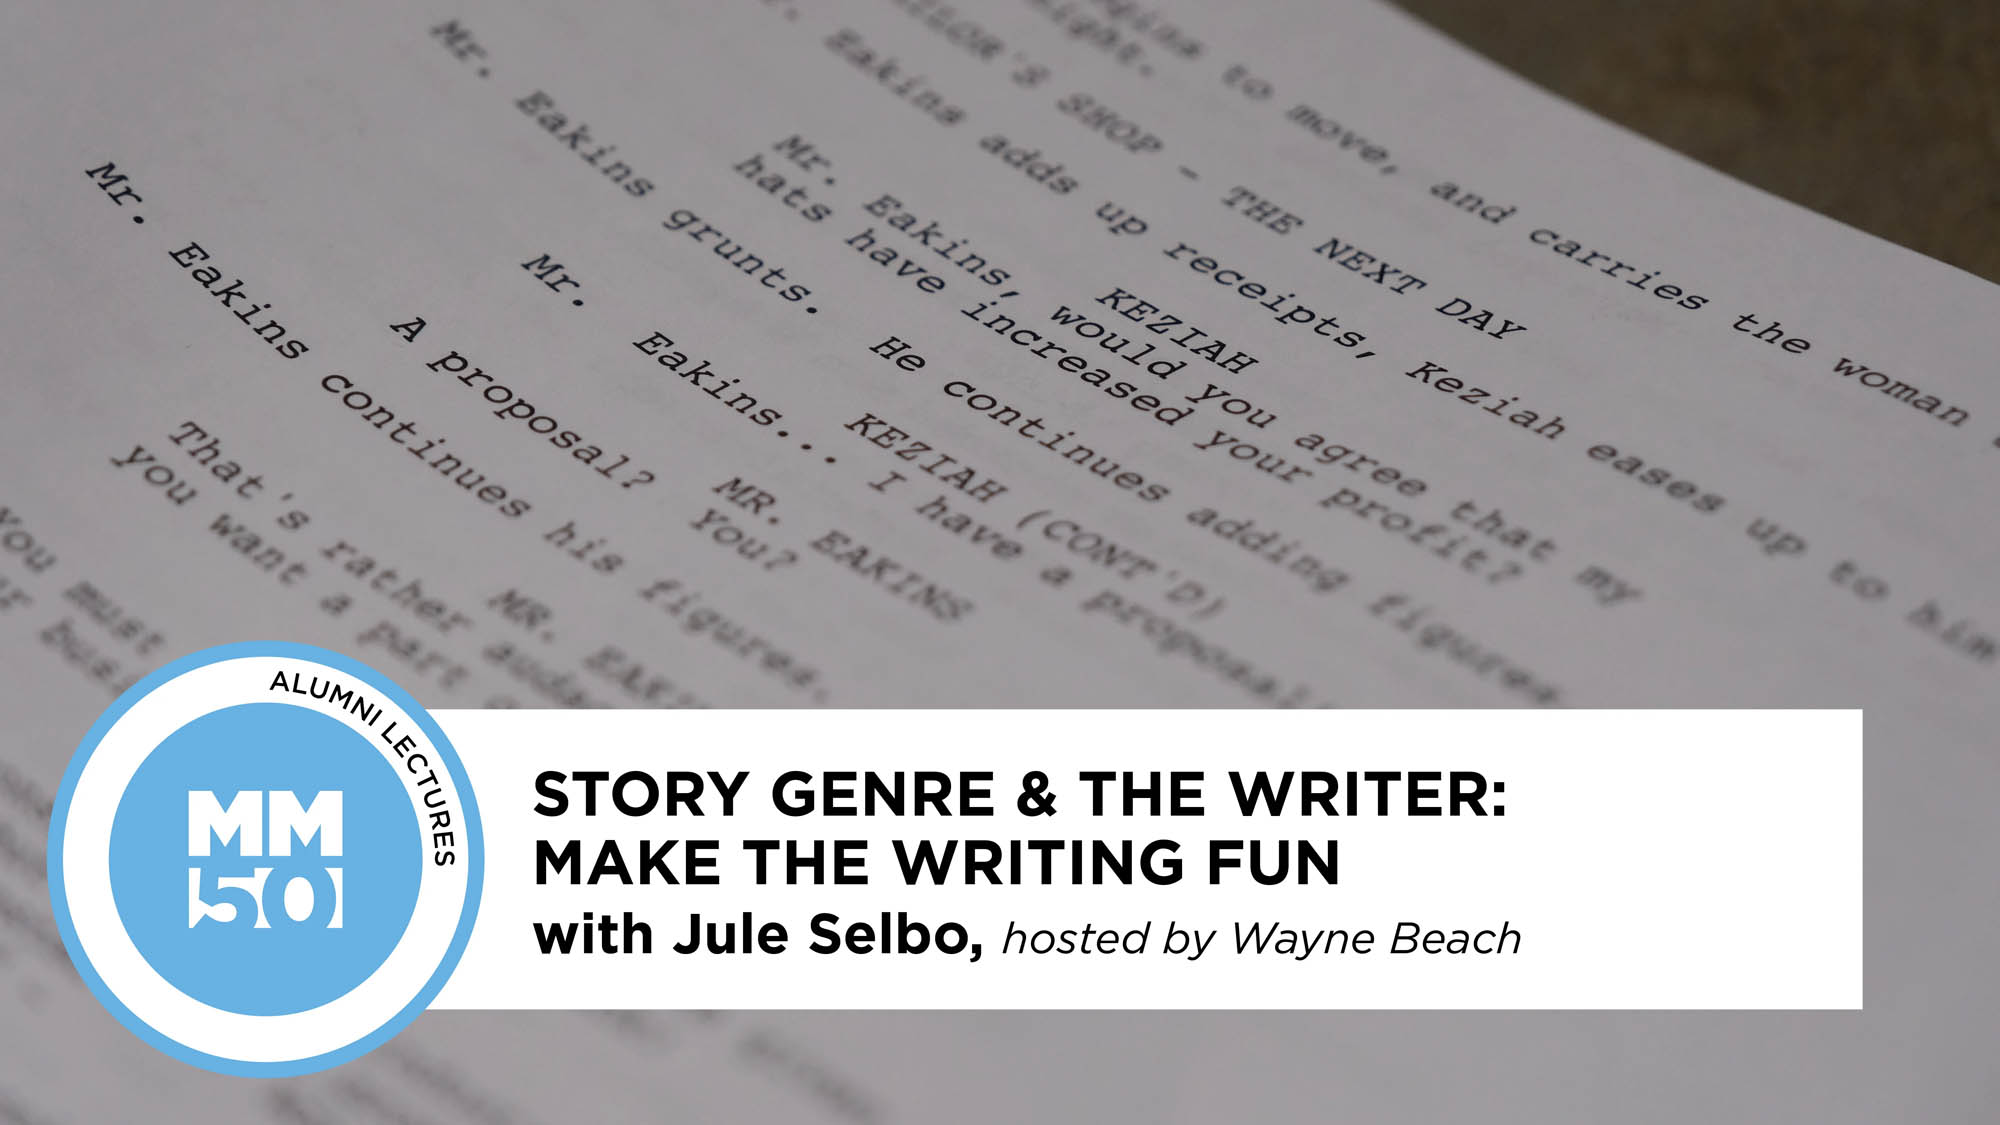 Story Genre & the Writer - Make the Writing Fun with Jule Selbo (banner)